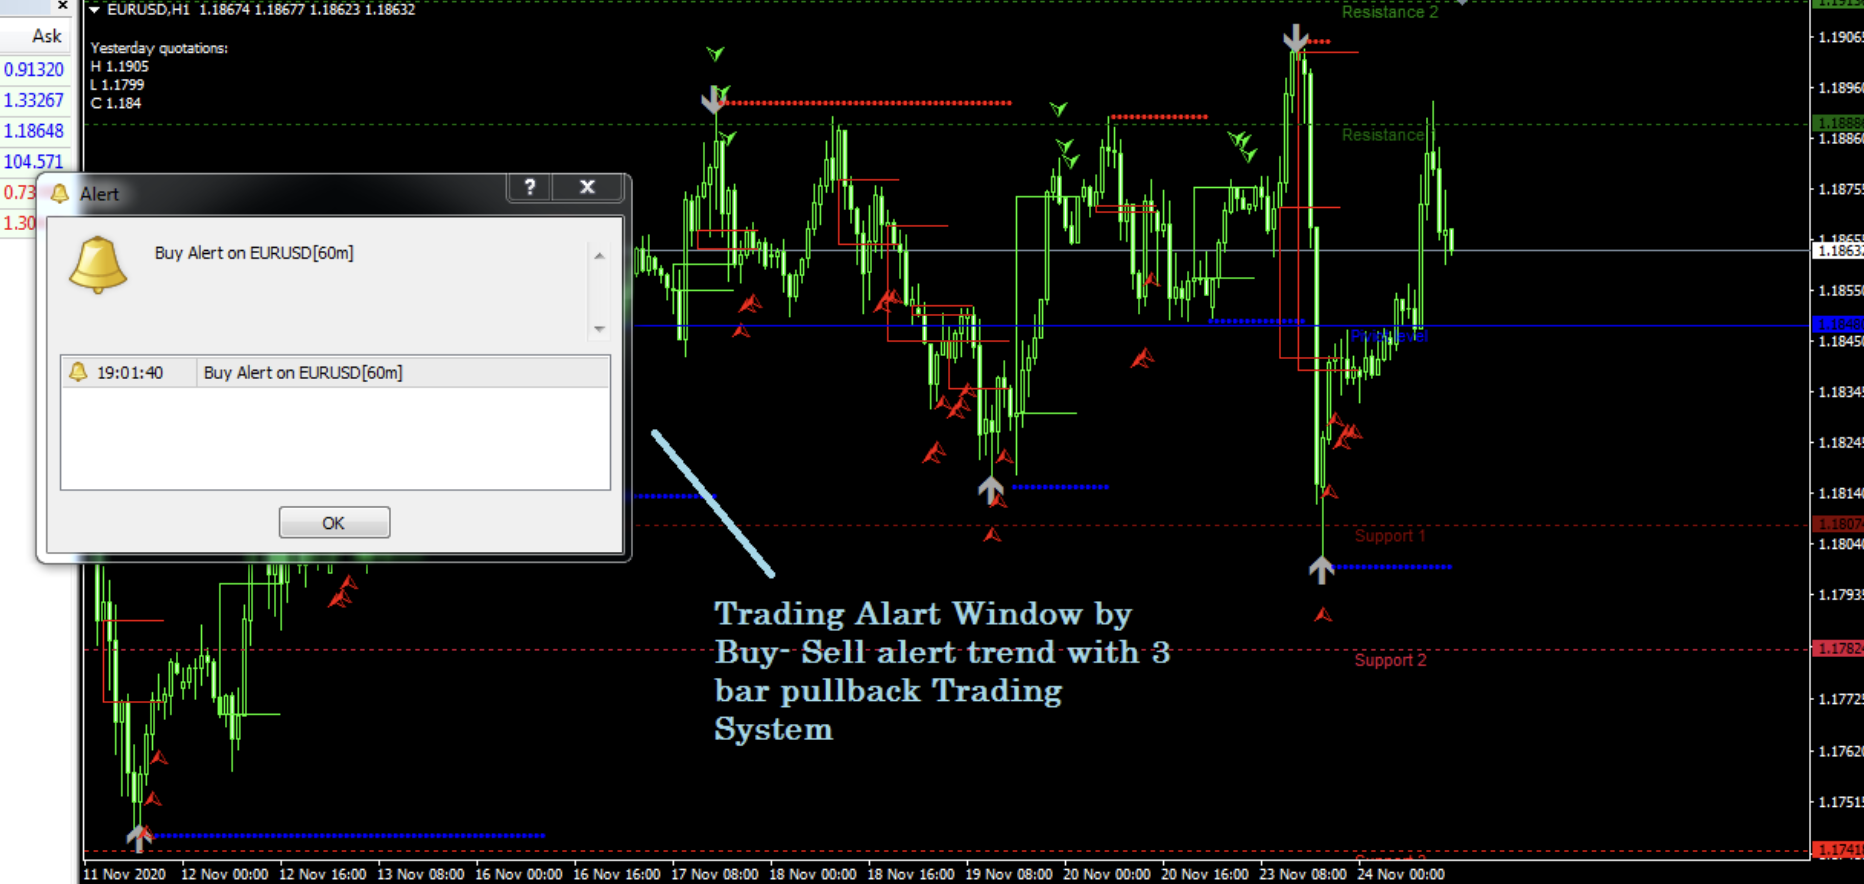 Buy-Sell alert trend with 3 bar pullback